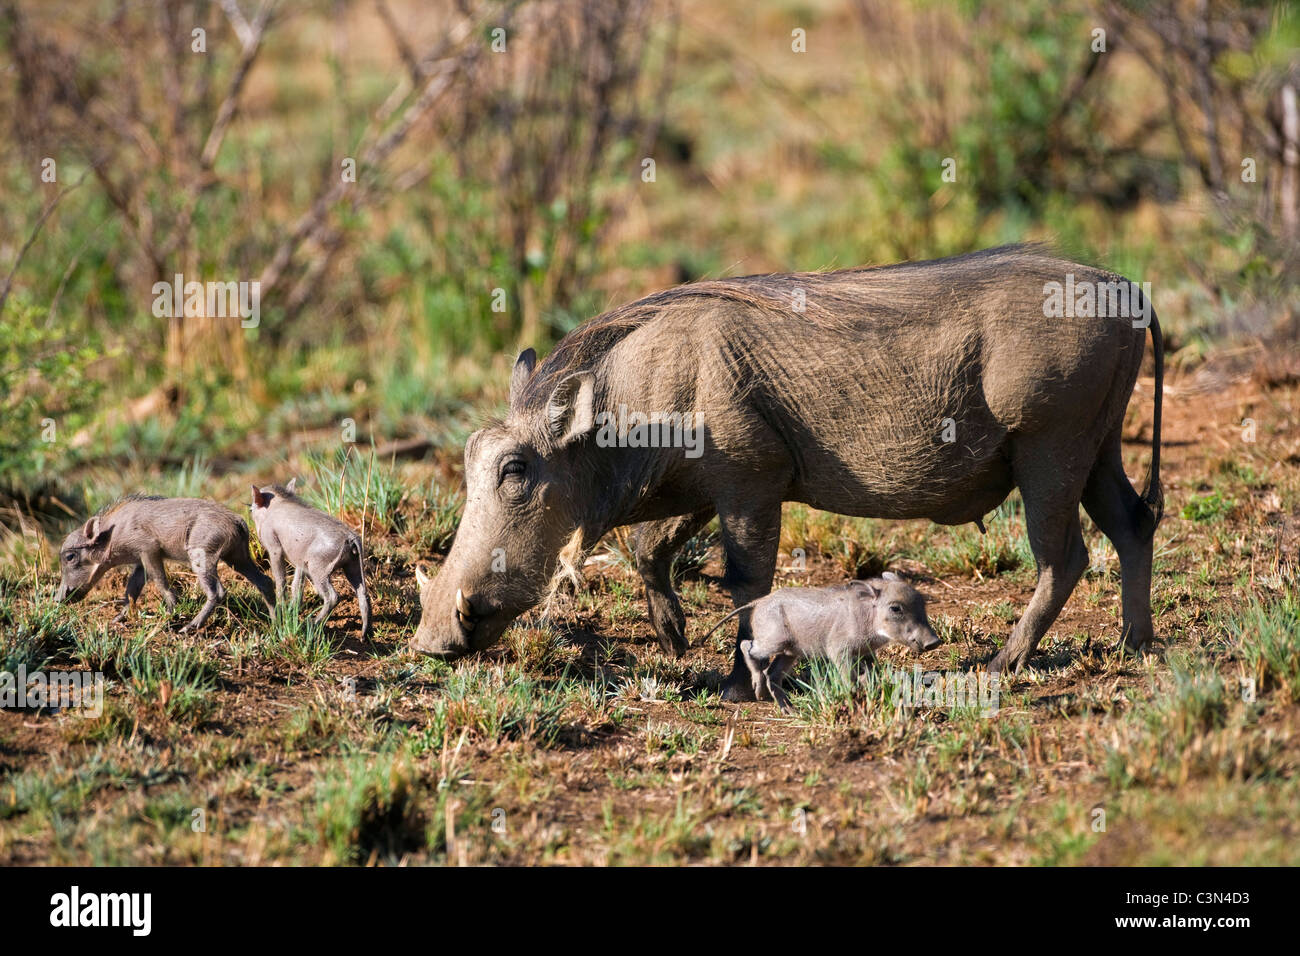 South Africa, near Rustenburg, Pilanesberg National Park. Warthogs, Phacochoerus aethiopicus. Mother and young. Stock Photo